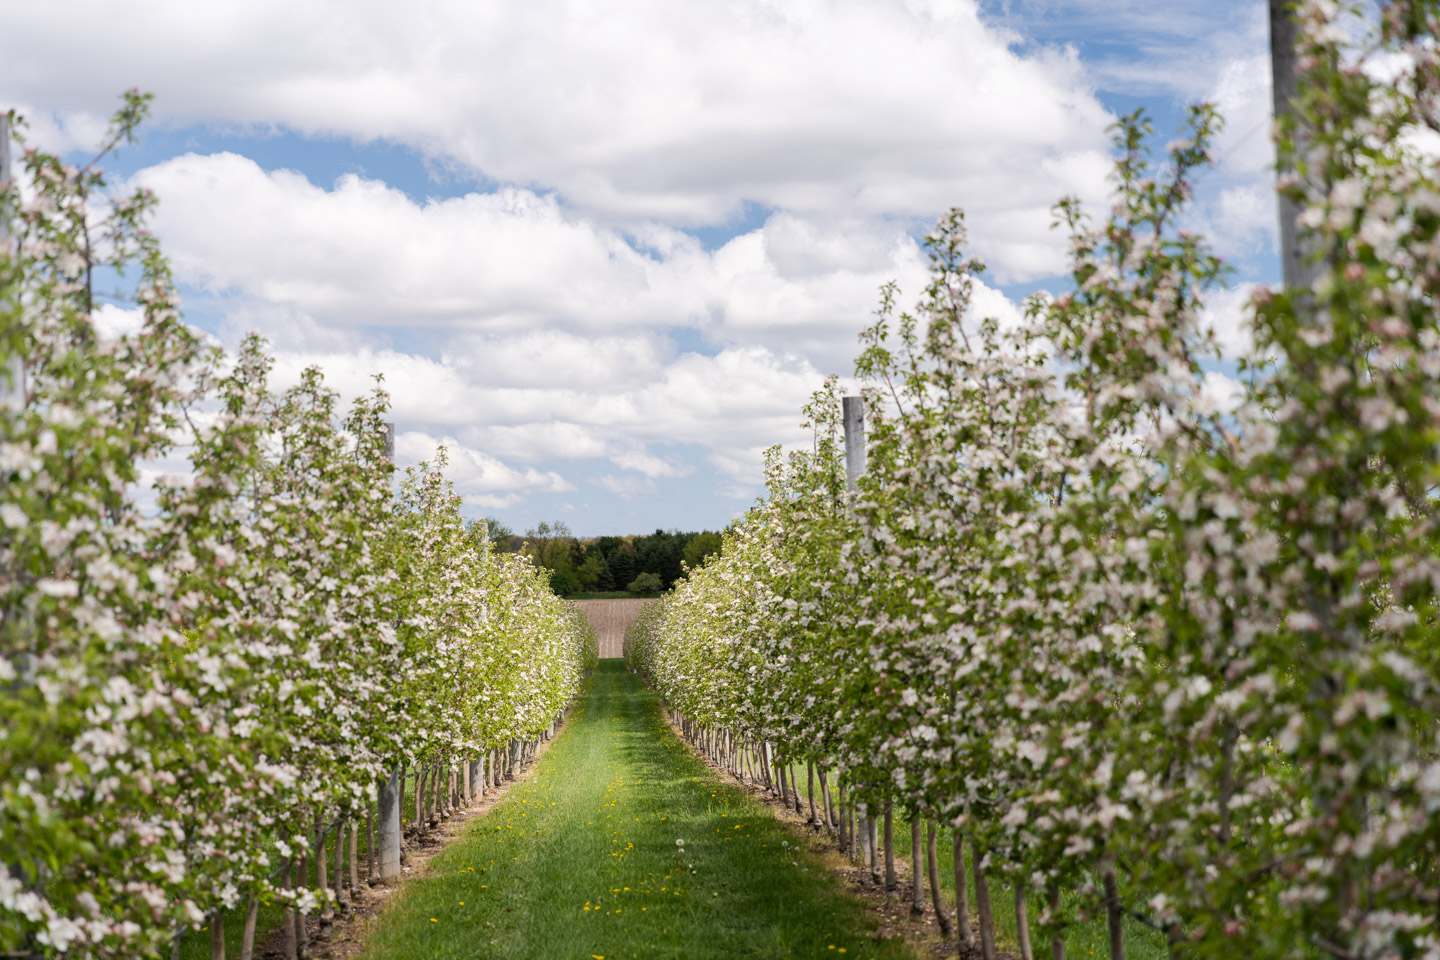 farm photographer - blossoms on the trees of an organic apple orchard